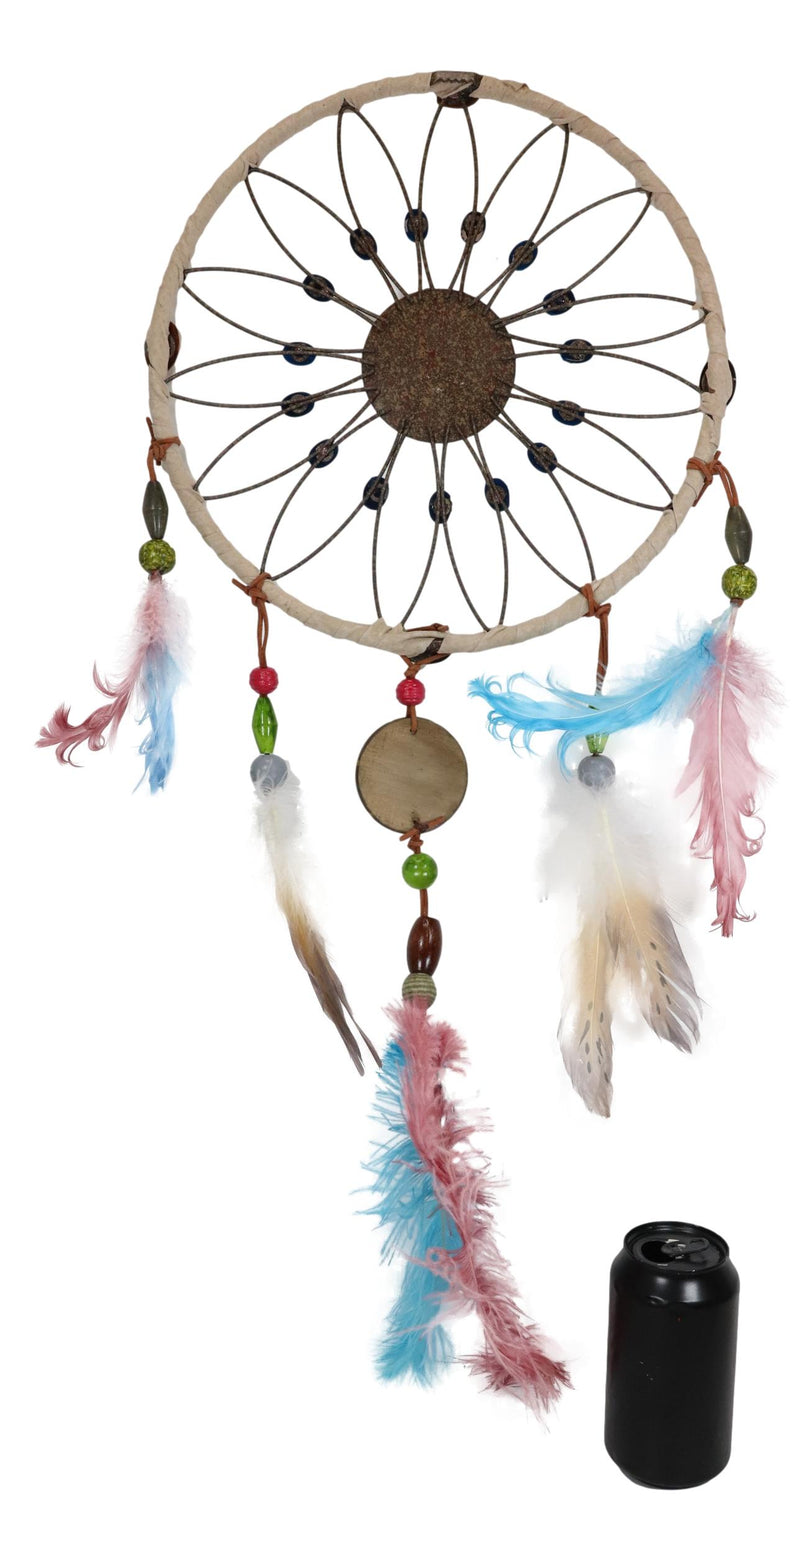 Set Of 2 Southwestern Tribal Indian Boho Chic Floral Feather Wall Dreamcatchers